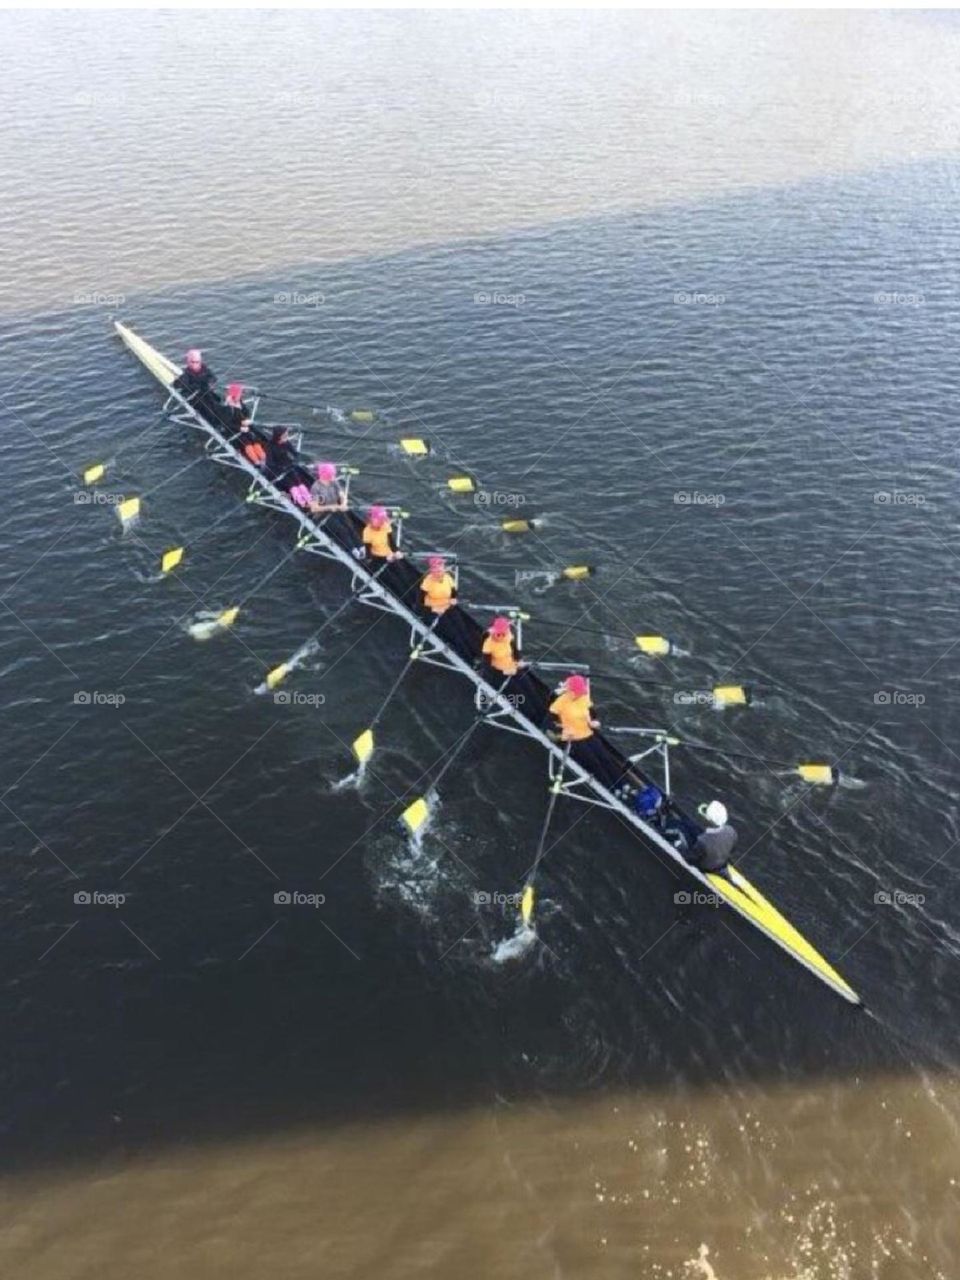 Magical movement of rowing quad in river 